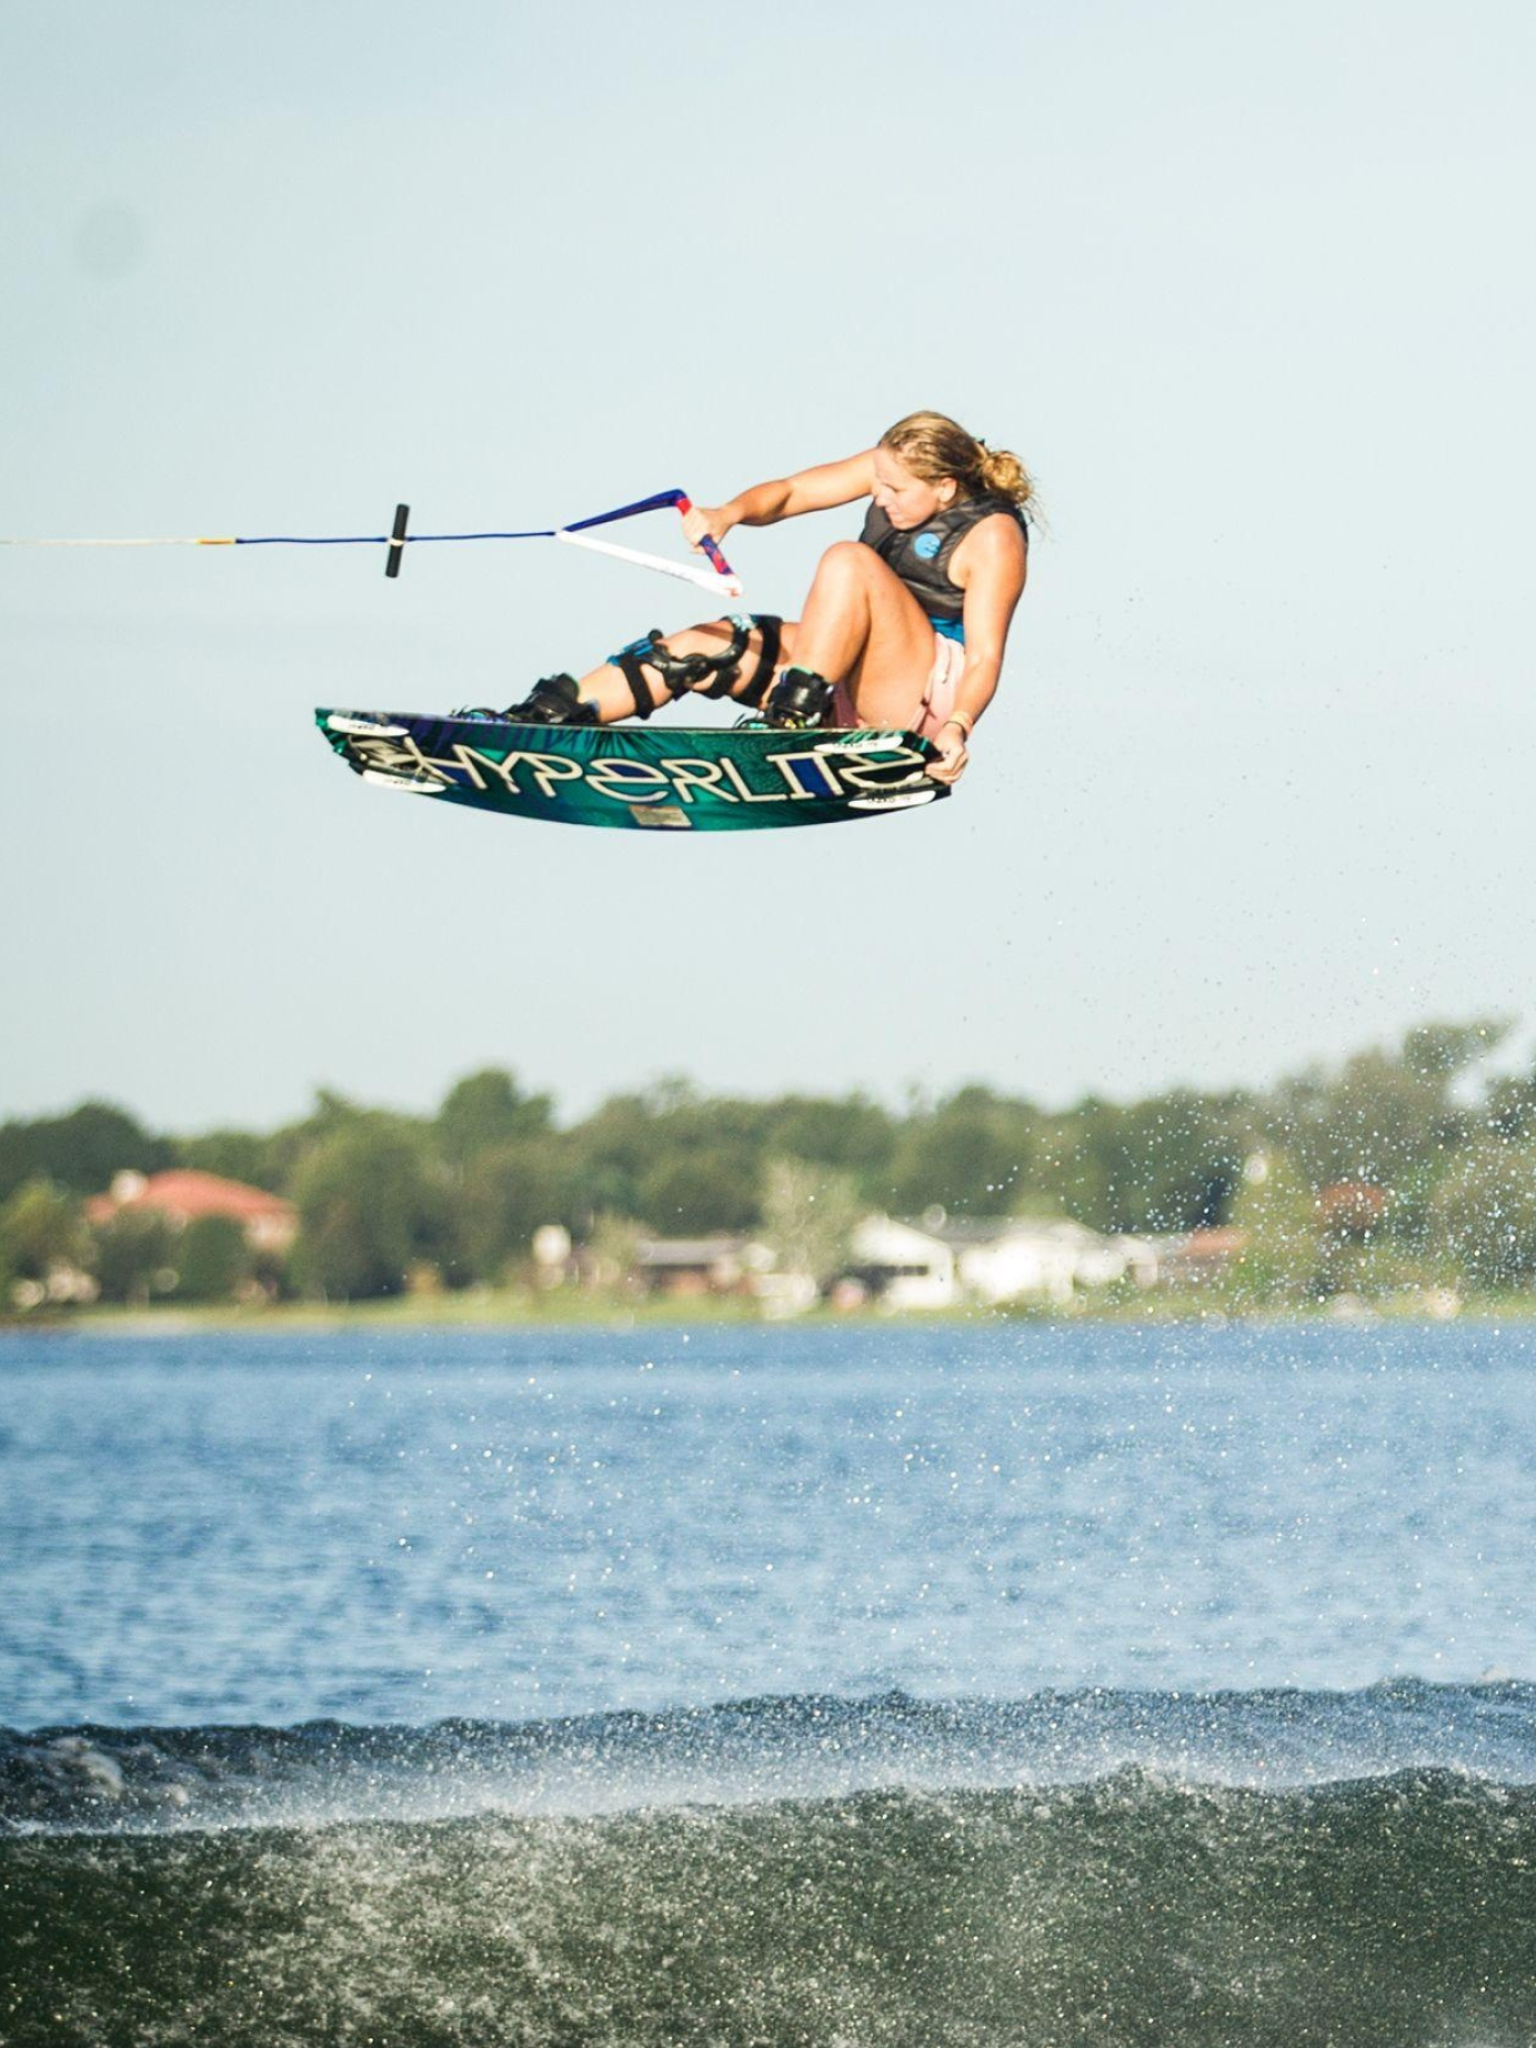 Wakeboarding: Girl uses a short surfboard with foot bindings to perform a tail grab trick. 1540x2050 HD Wallpaper.